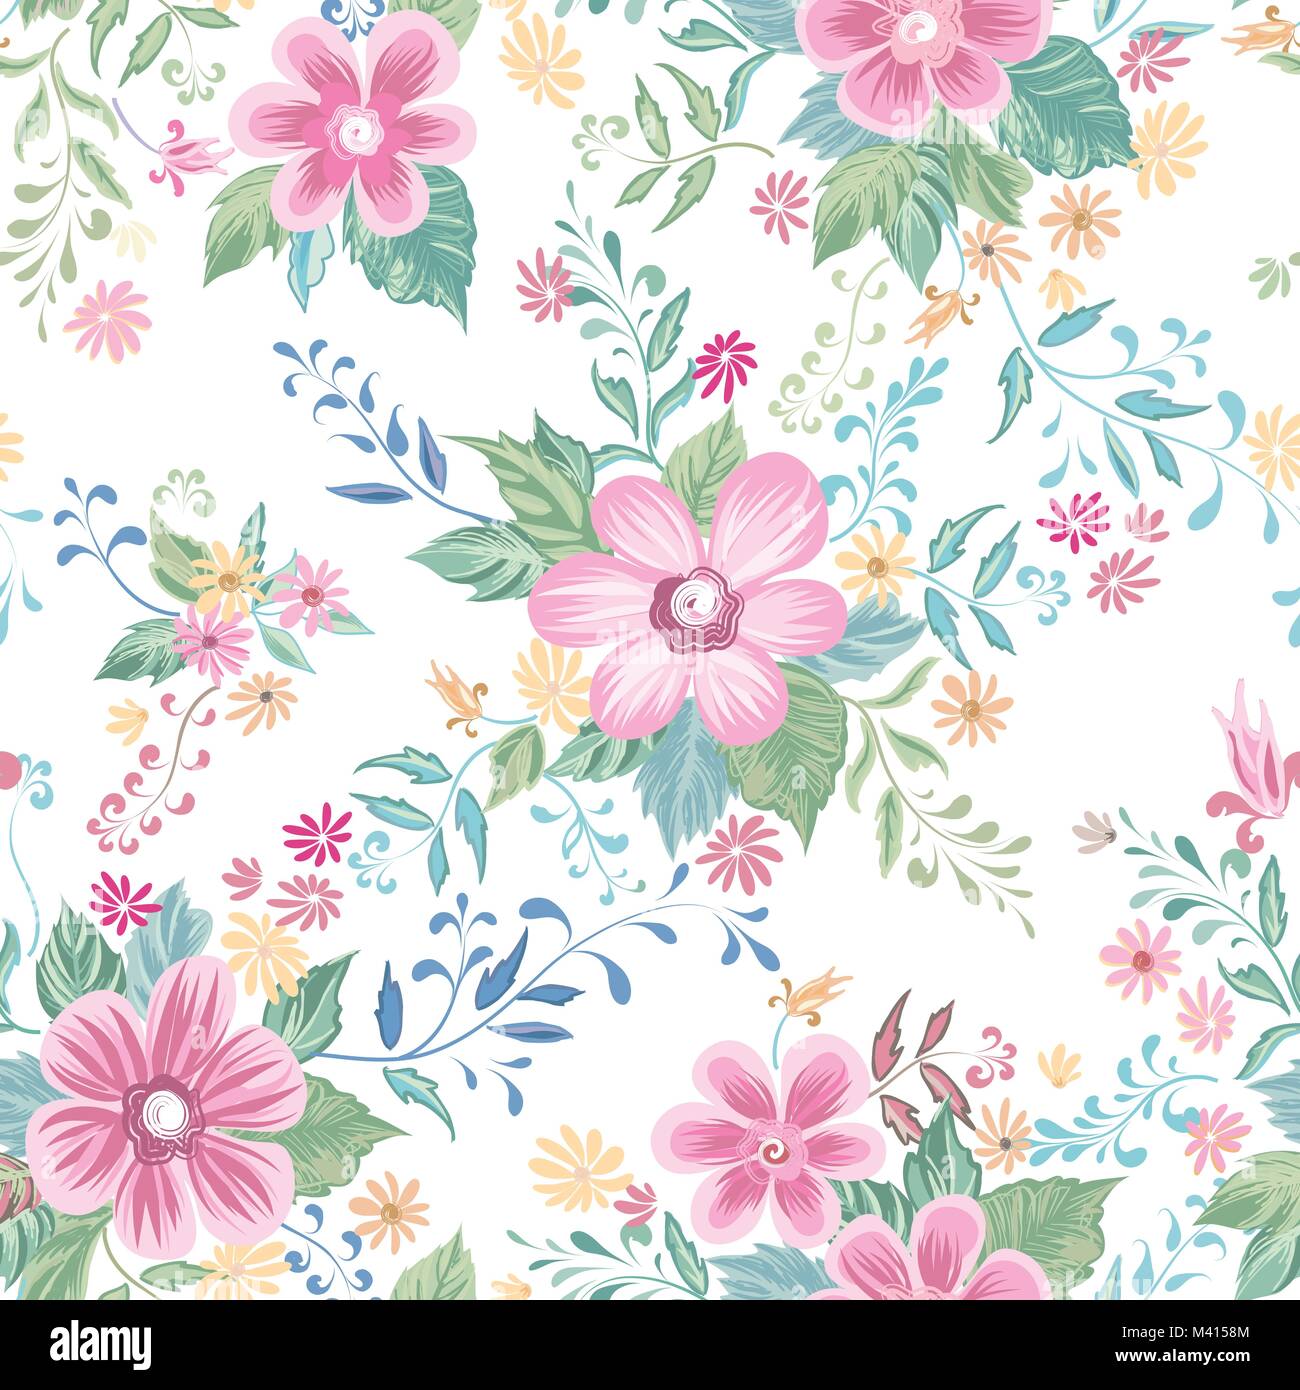 Floral seamless pattern. Flower background. Flourish ornamental summer wallpaper with flowers. Stock Vector